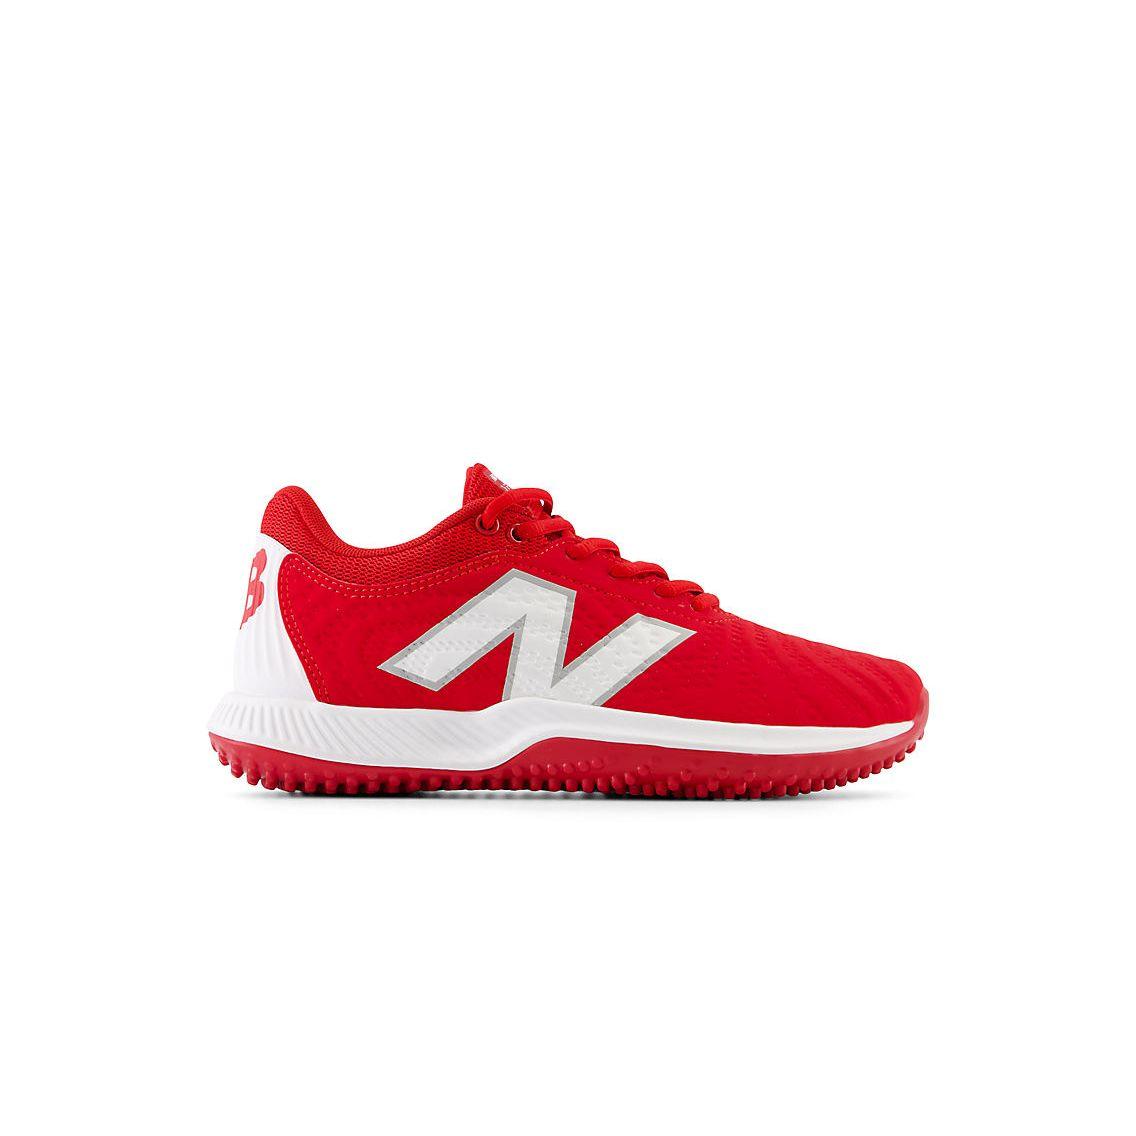 New Balance Women's FuelCell FUSE v4 Turf Trainer Softball Shoes - Team Red/Optic White - STFUSER4 - Smash It Sports